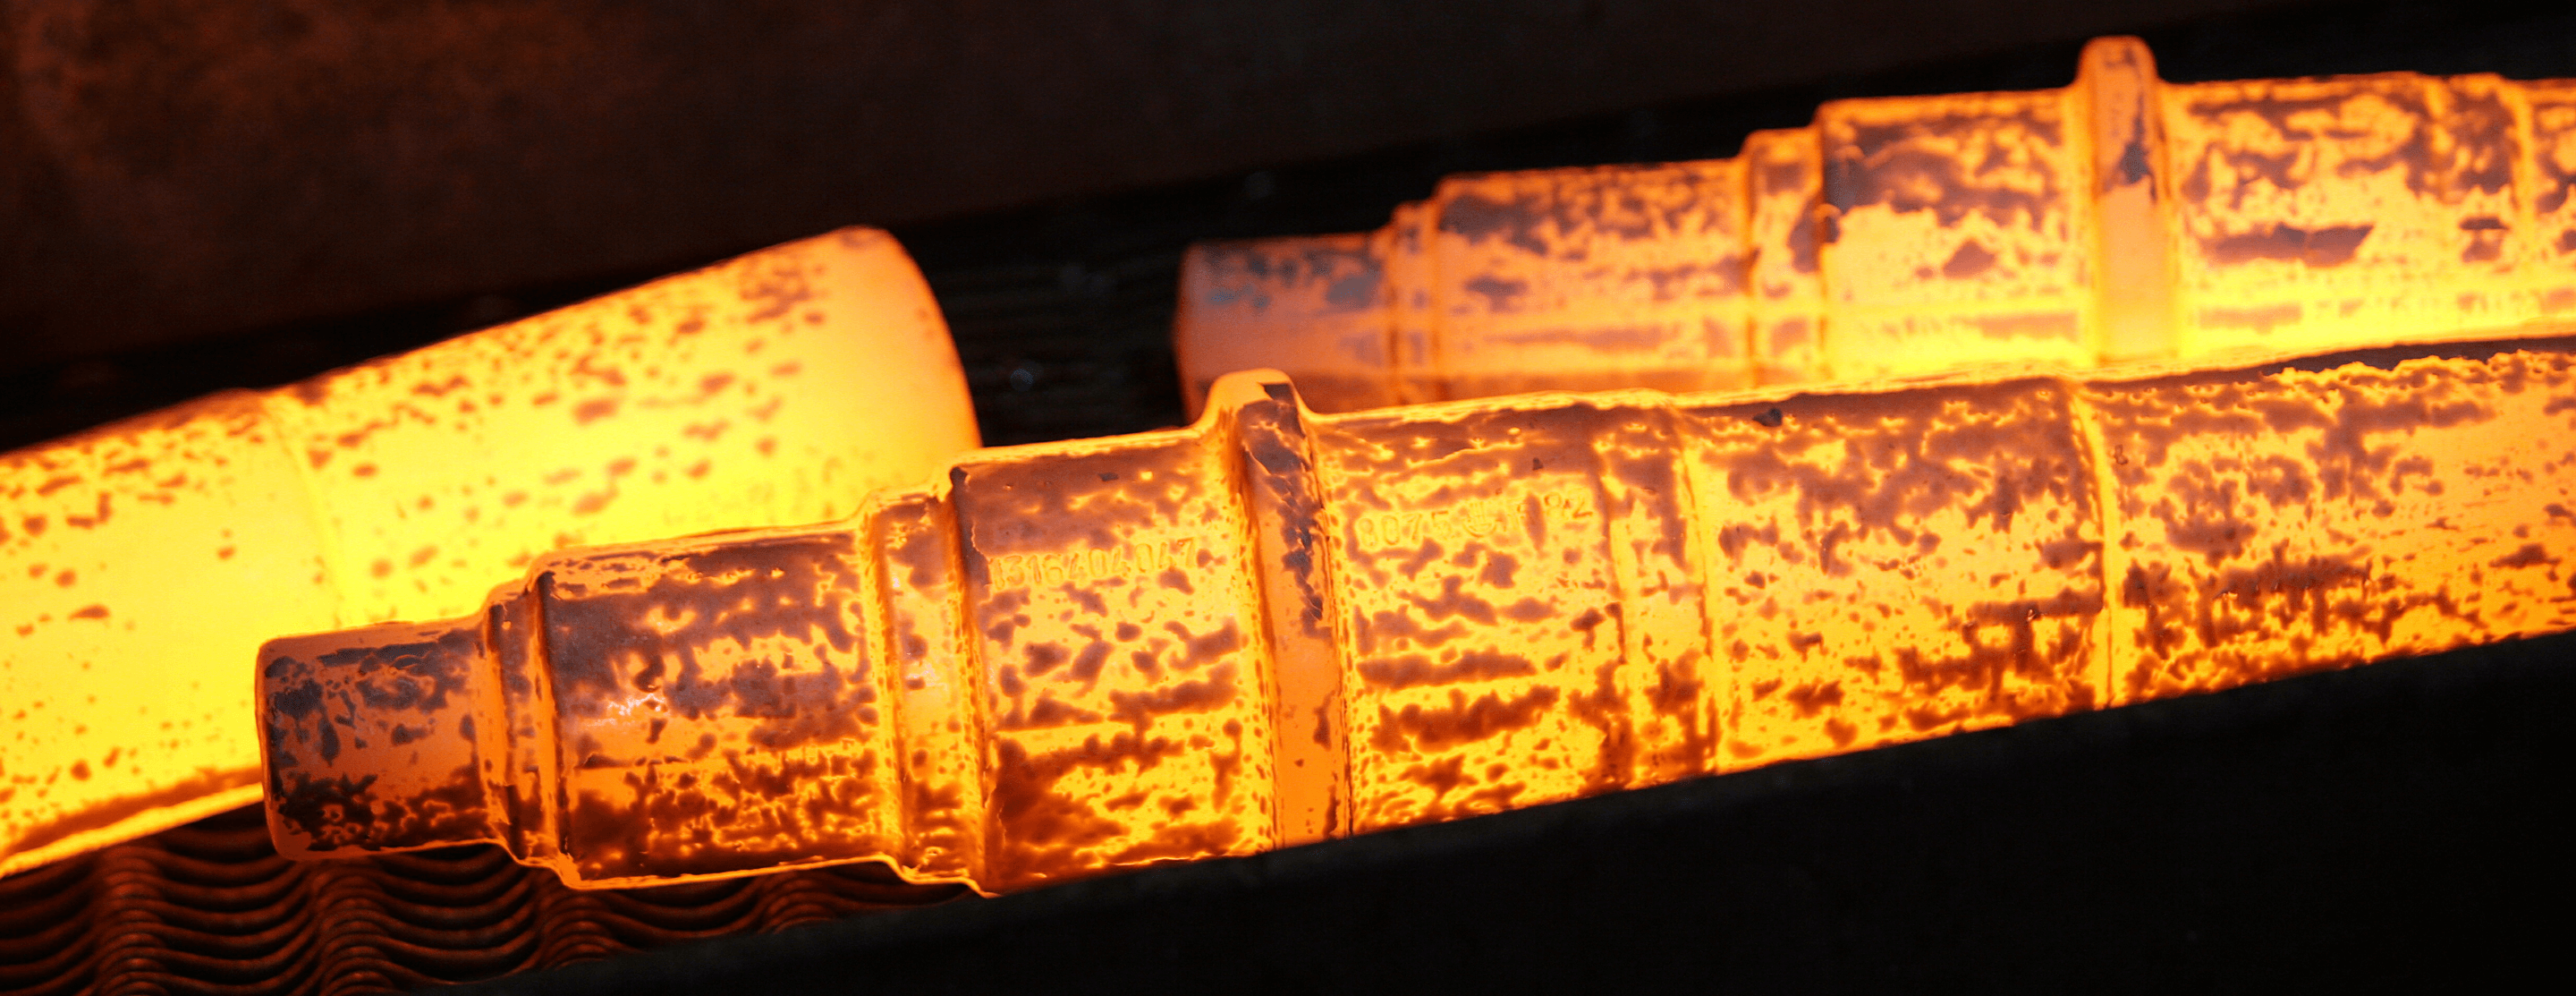 glowing red-hot steel going through the drop forging process